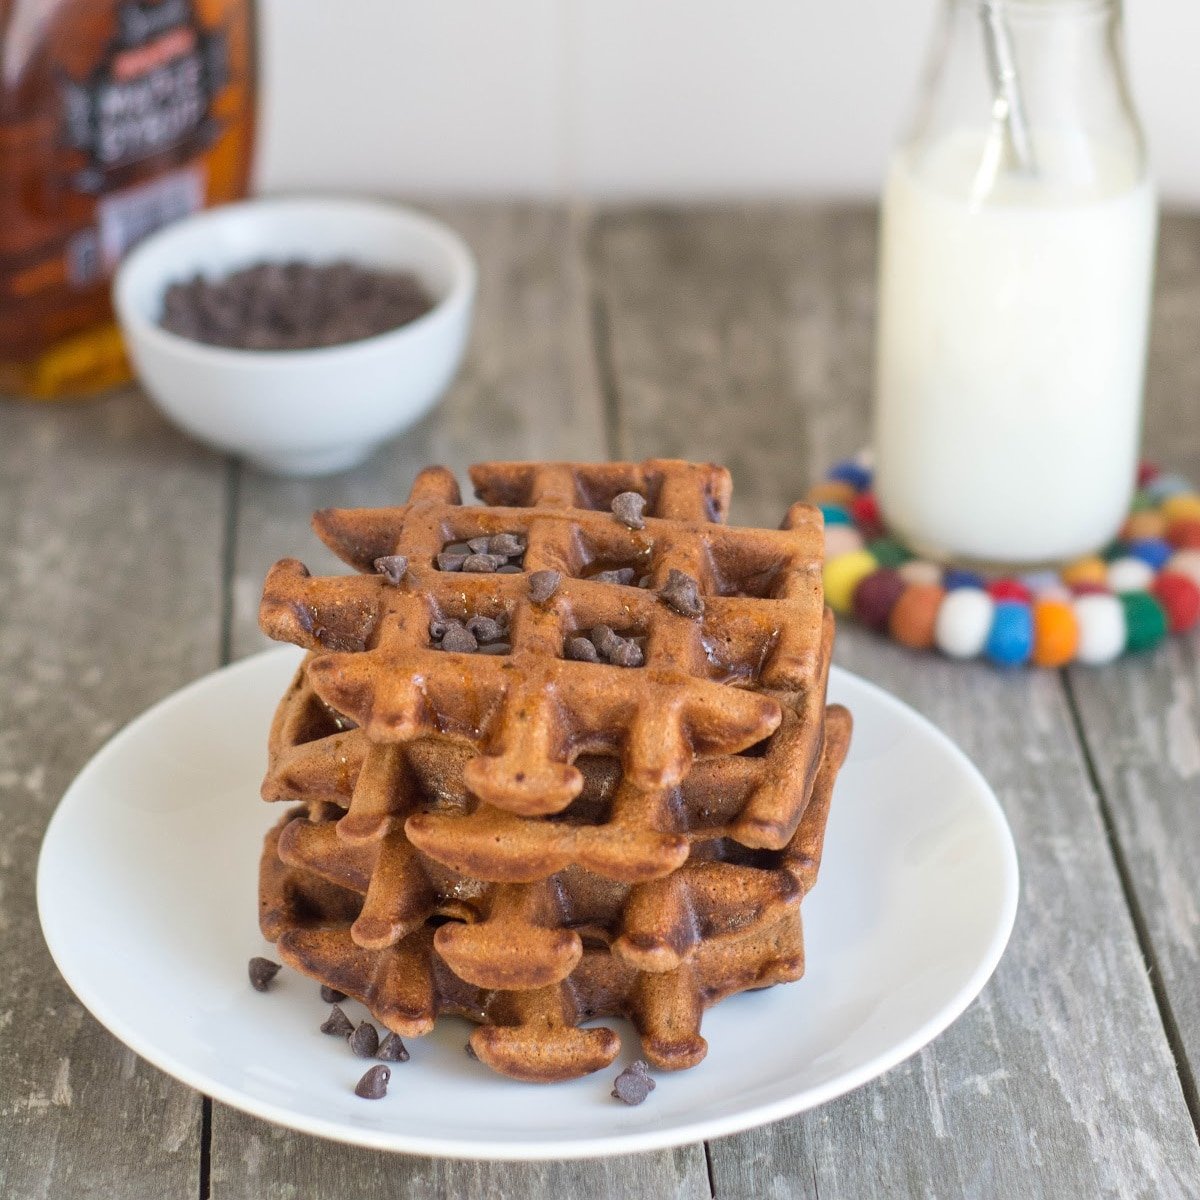 Chocolate Protein Waffles With No Protein Powder (16g Protein!)